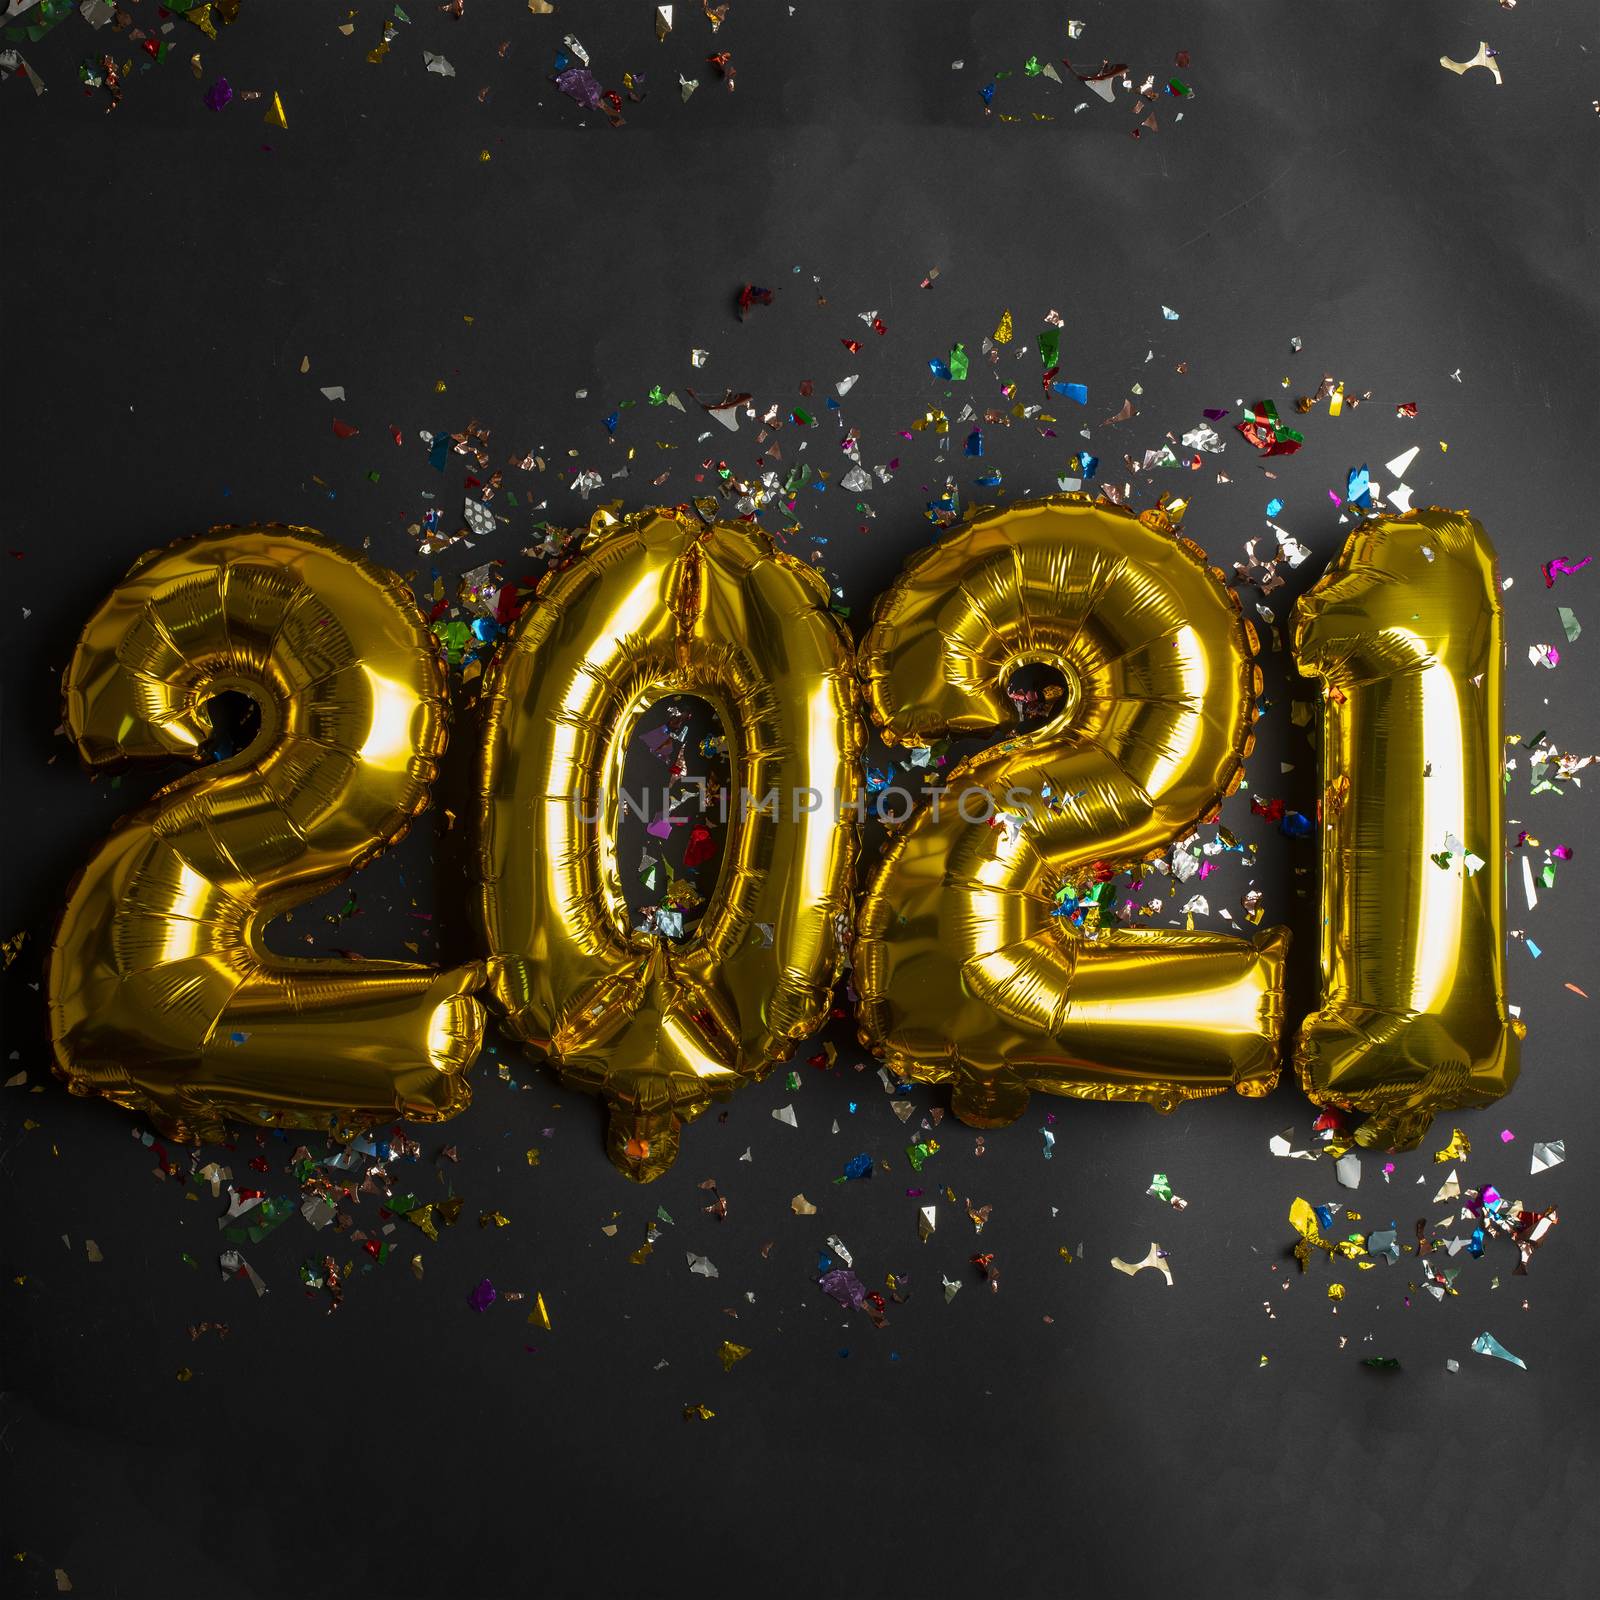 2021 new year concept from golden foil balloon and confetti on b by adamr